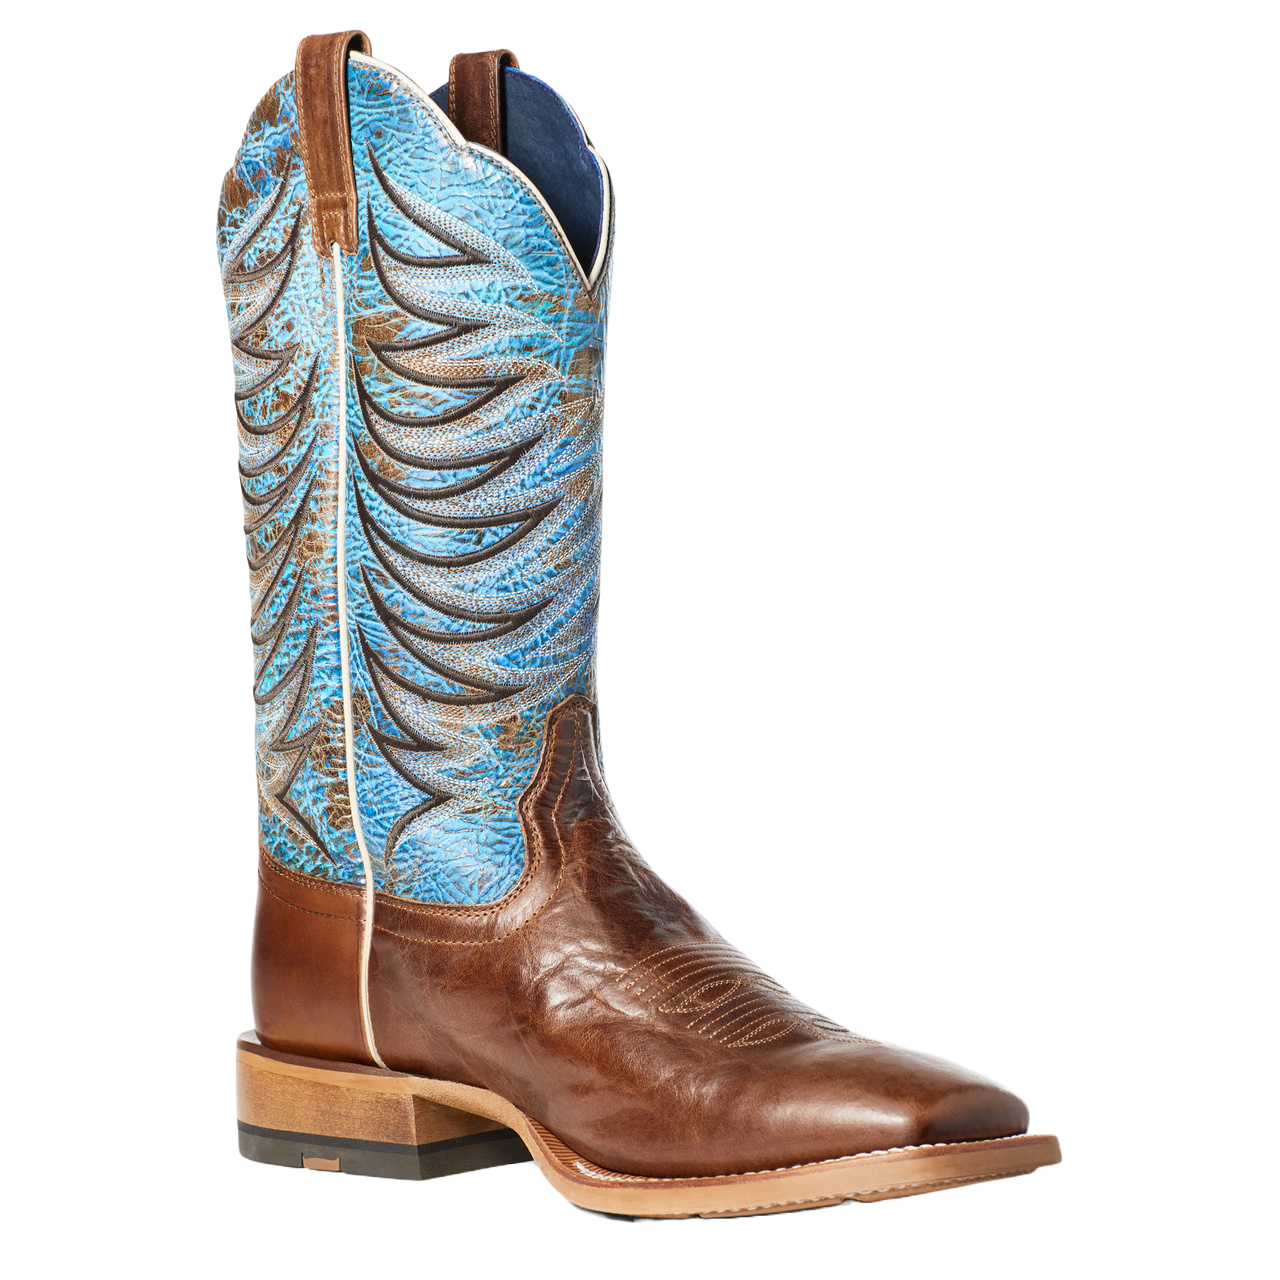 Ariat Men's Firecatcher Well Brown & Blue Lake Leather Boots 10035952